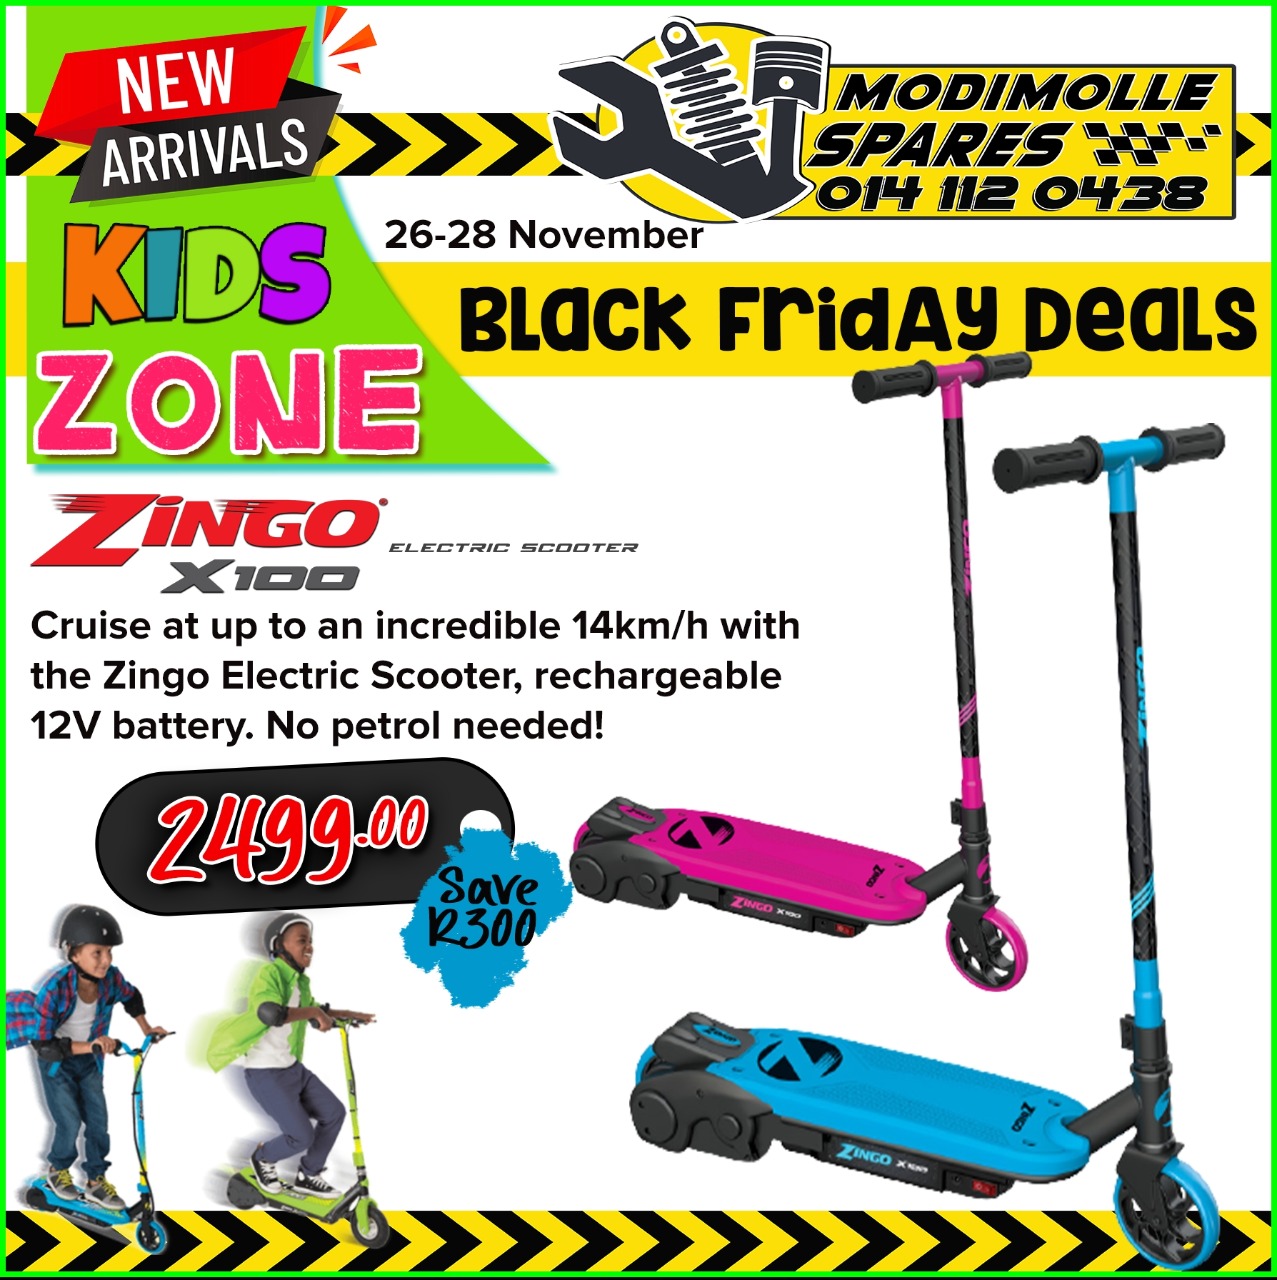 𝗡𝗘𝗪 𝗔𝗥𝗥𝗜𝗩𝗔𝗟! Zingo Electric Scooter at Modimolle Spares! 